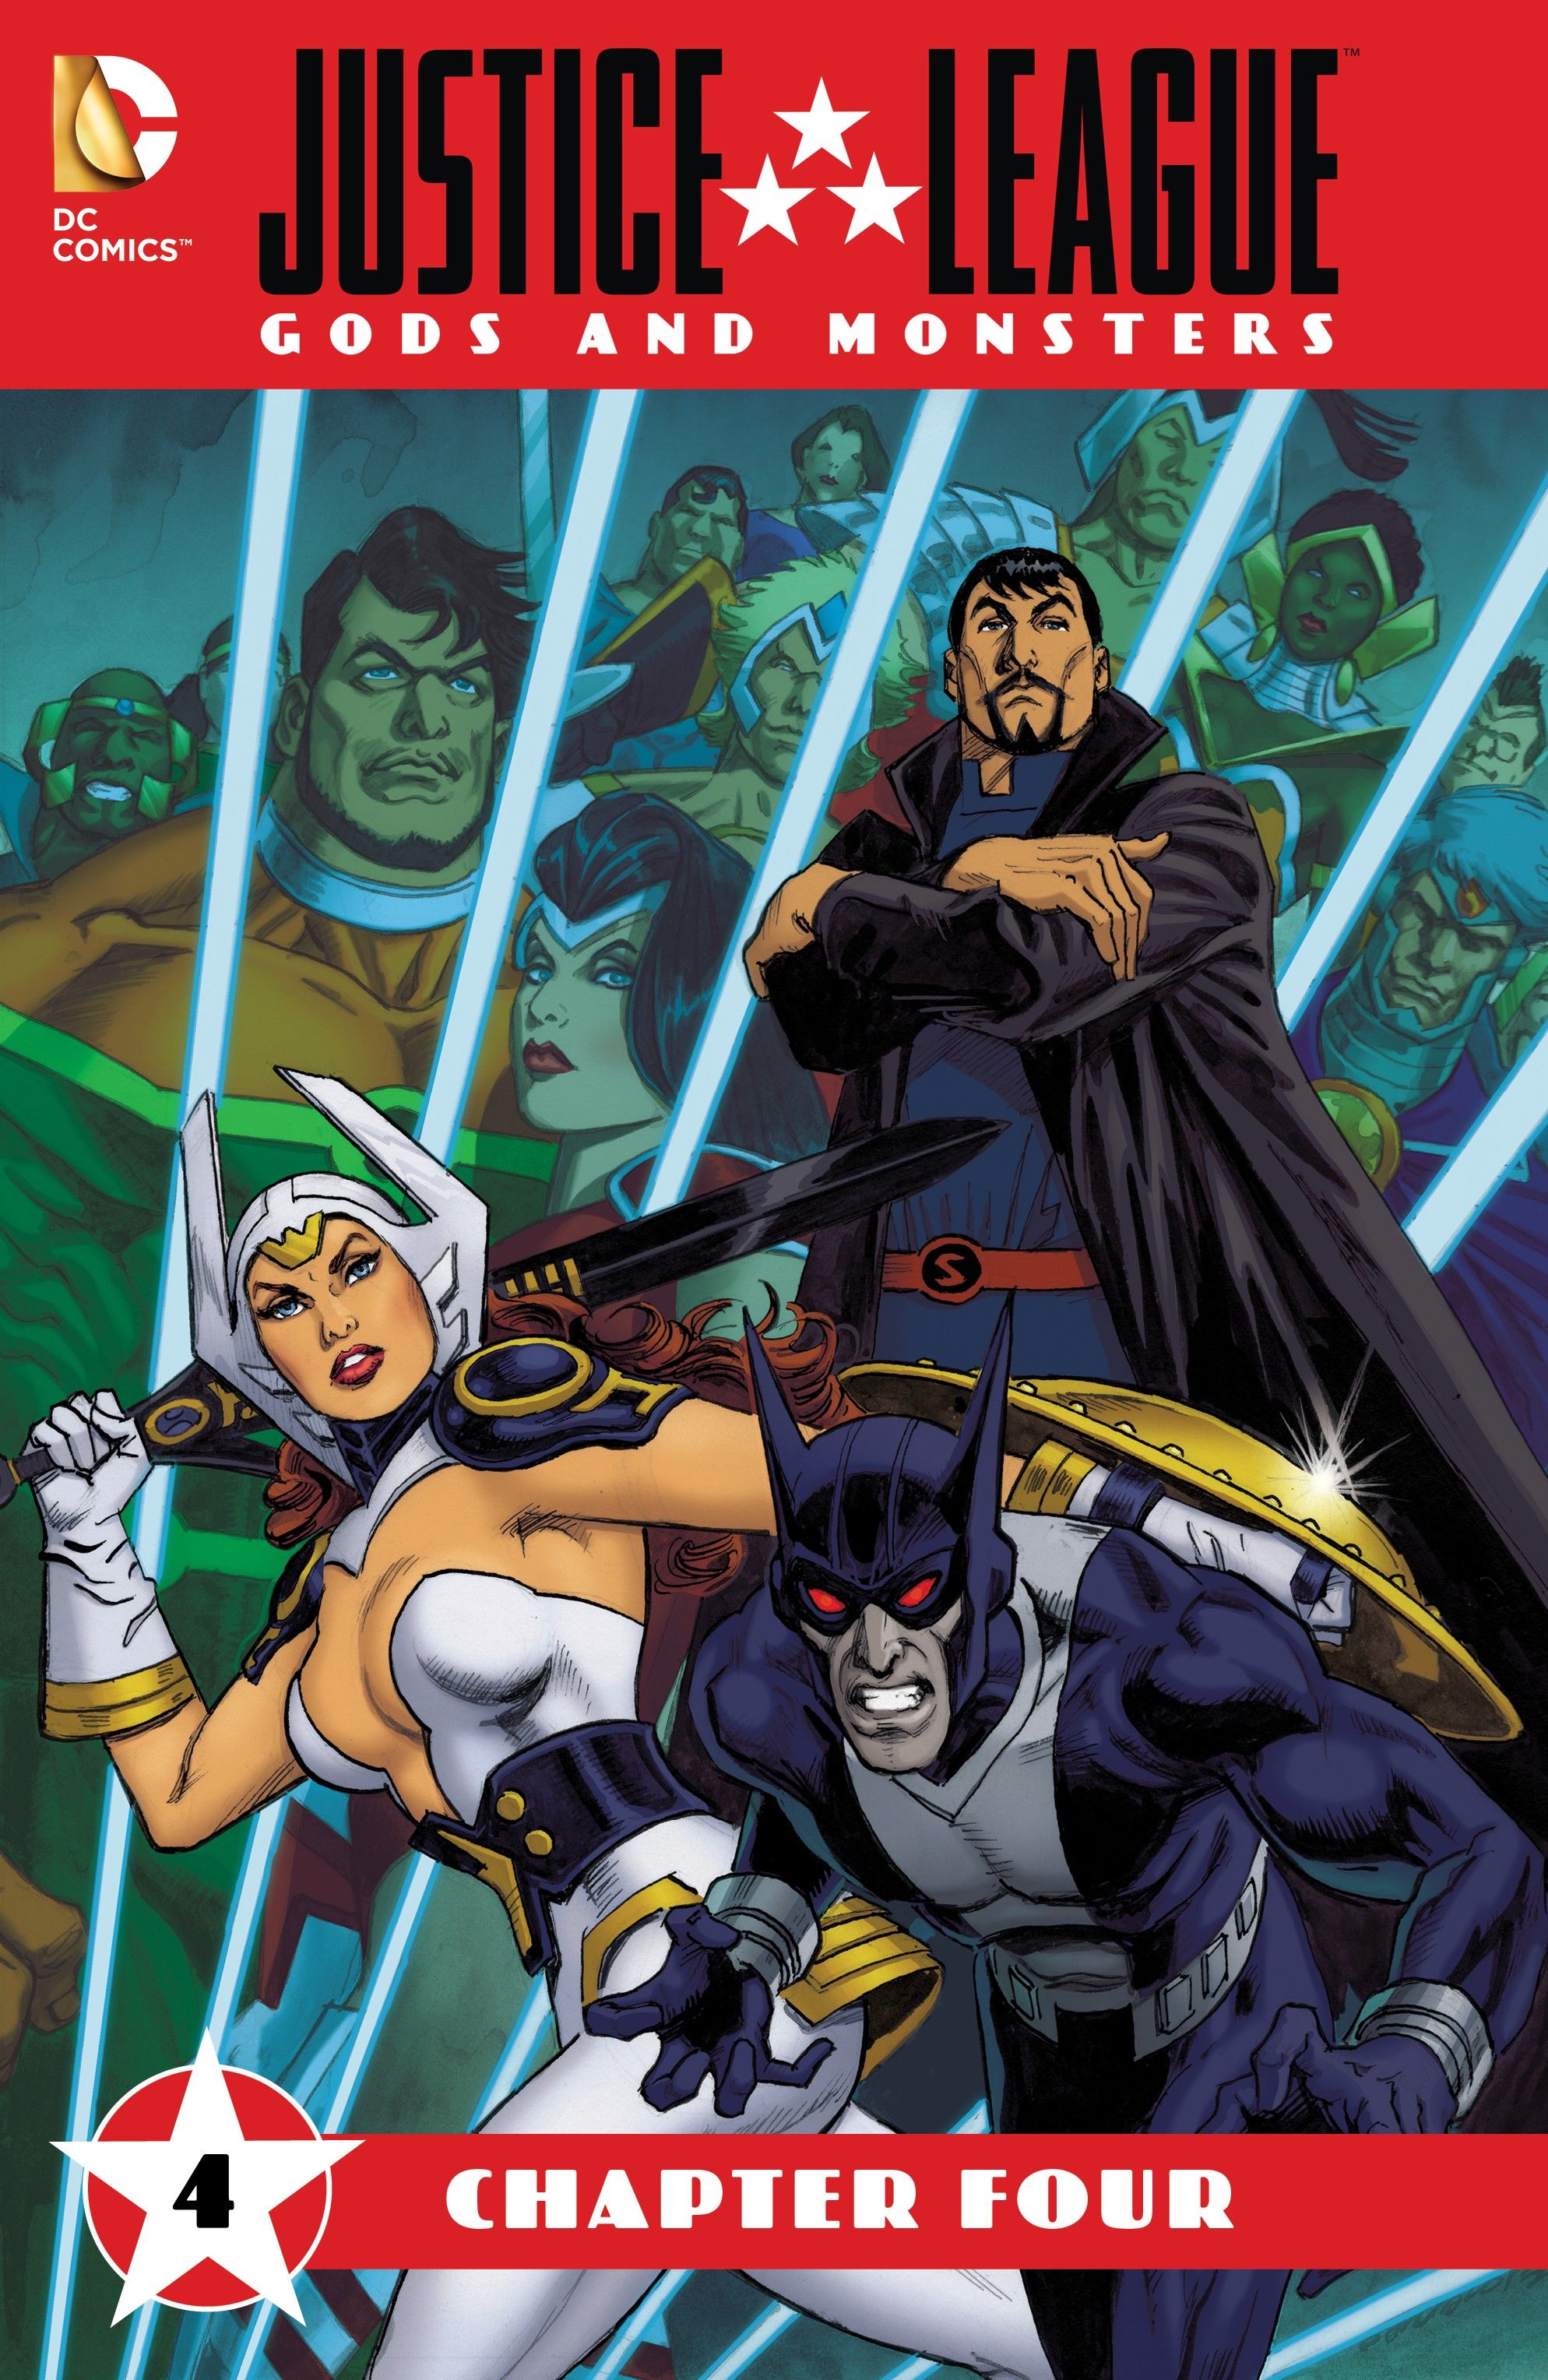 Justice League: Gods and Monsters #2 review | Batman News